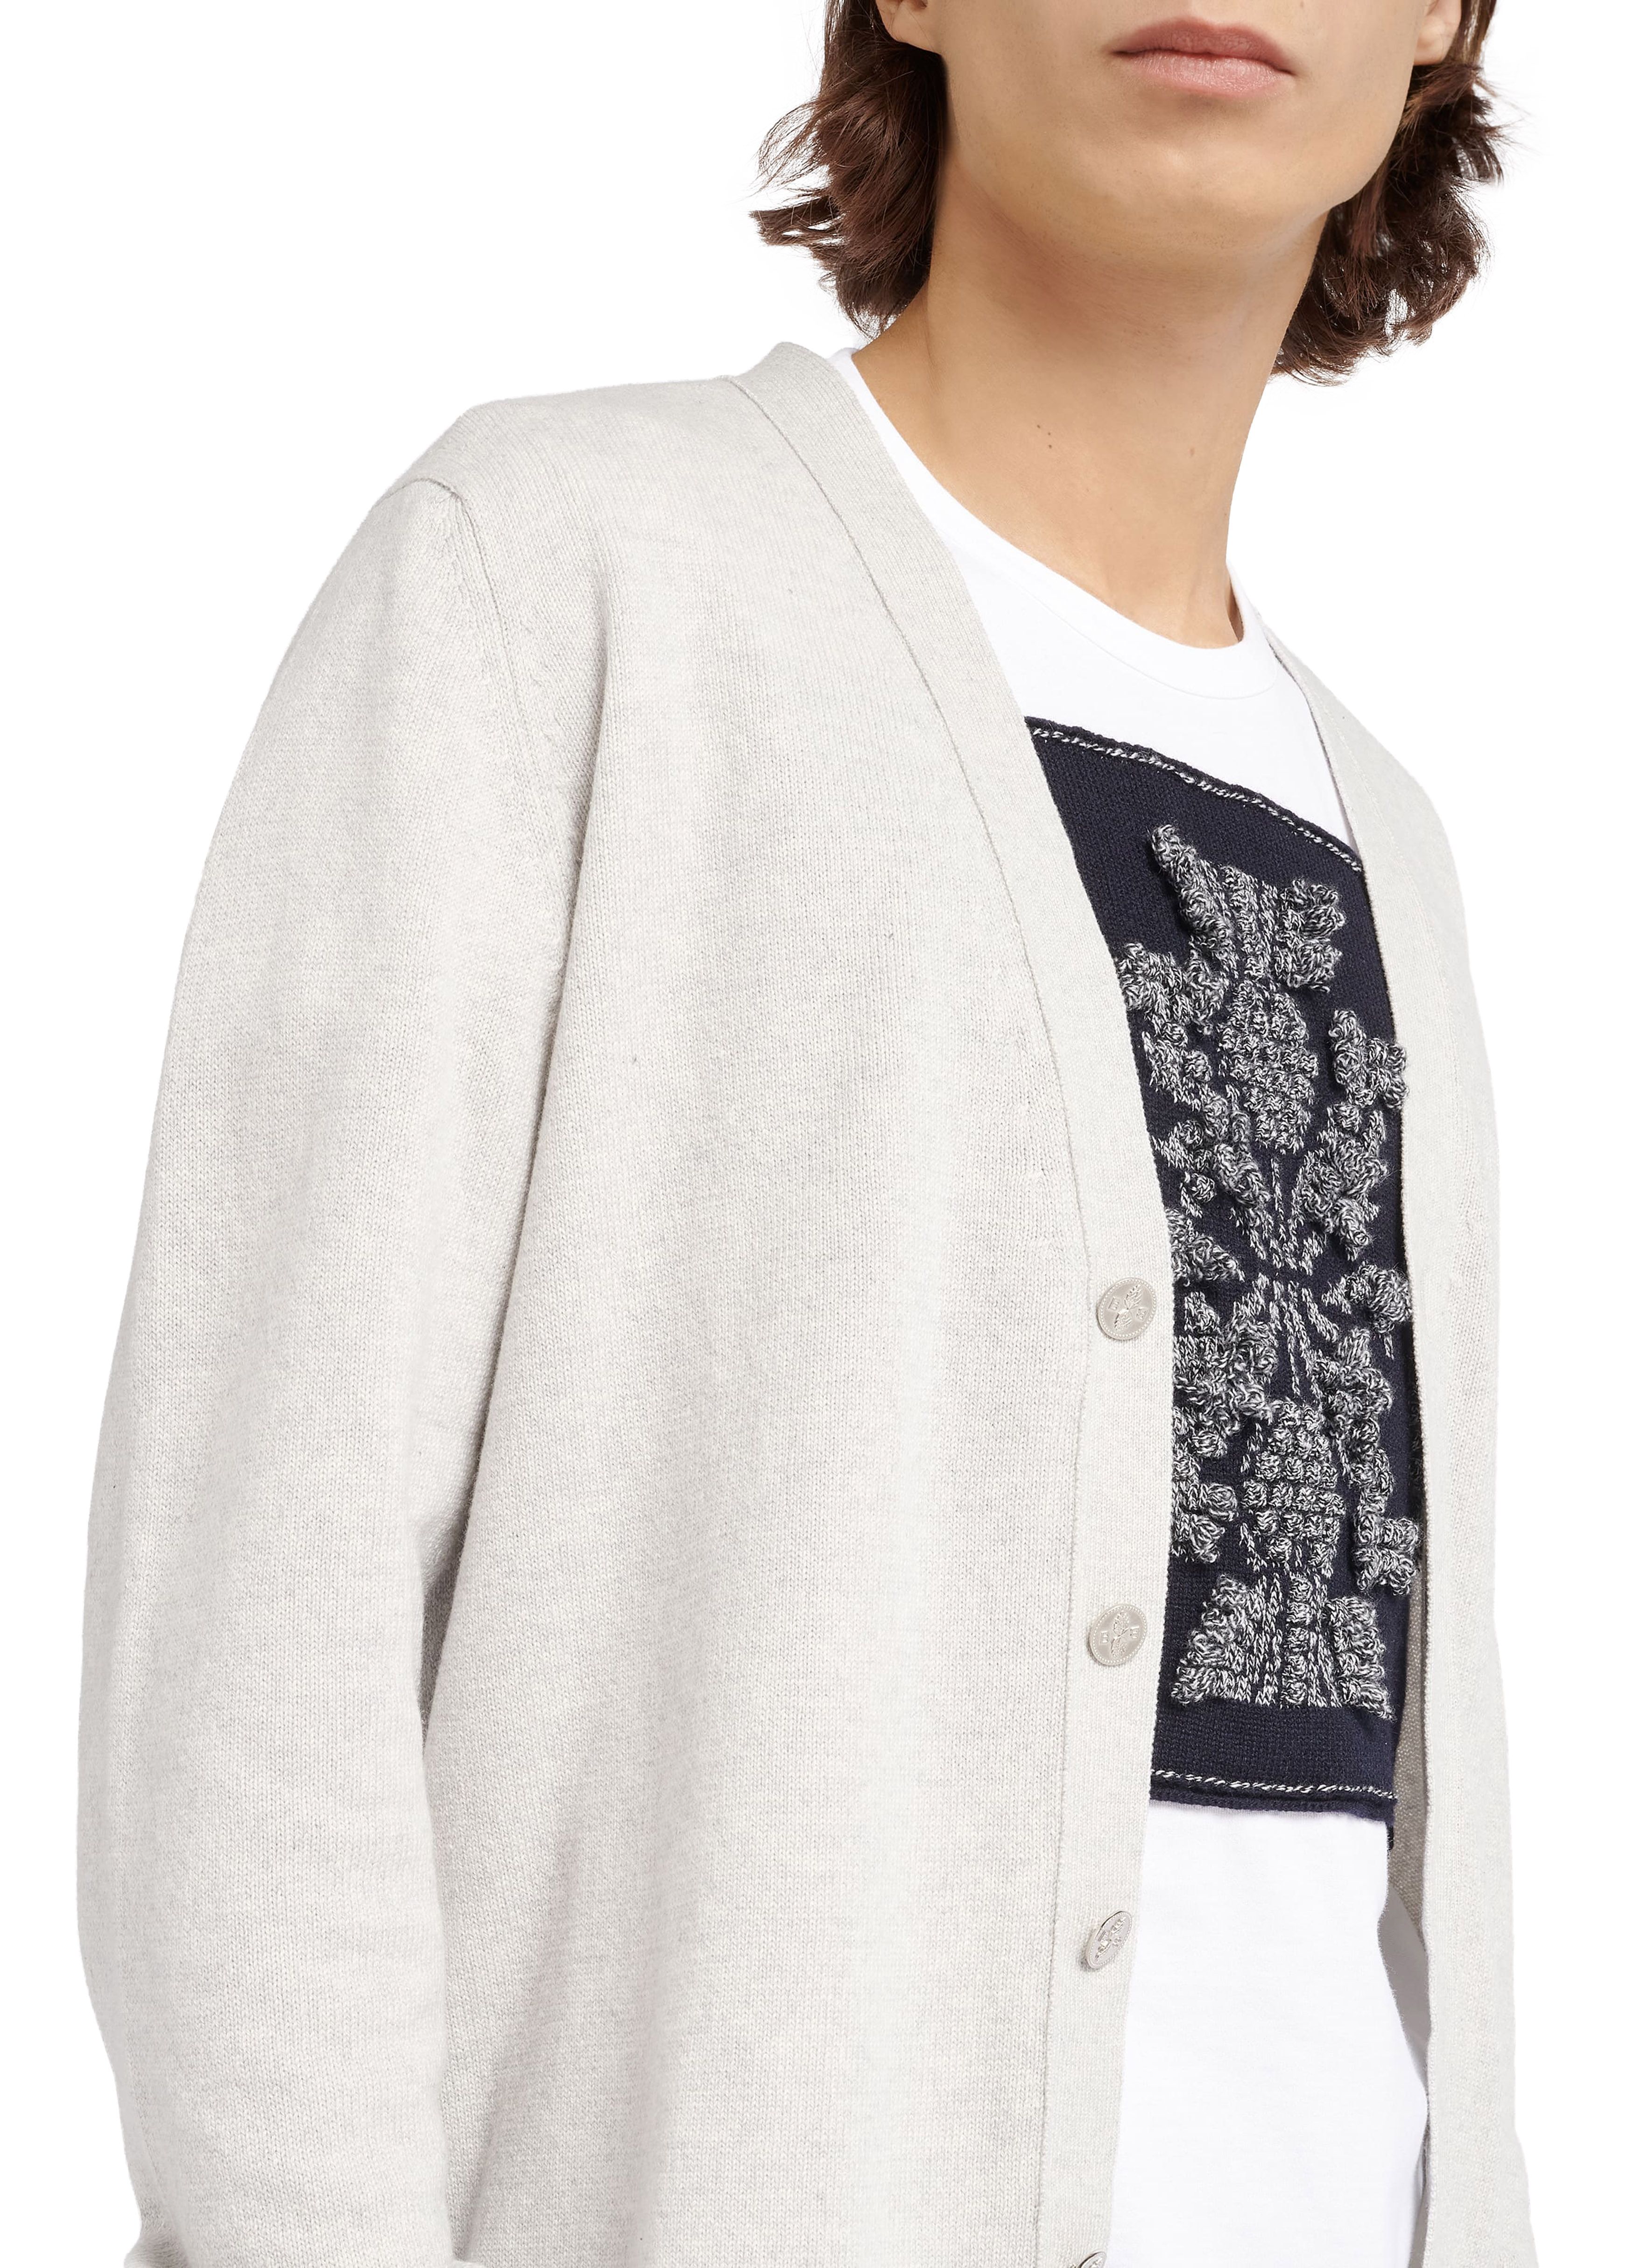 Barrie B Label cashmere cardigan